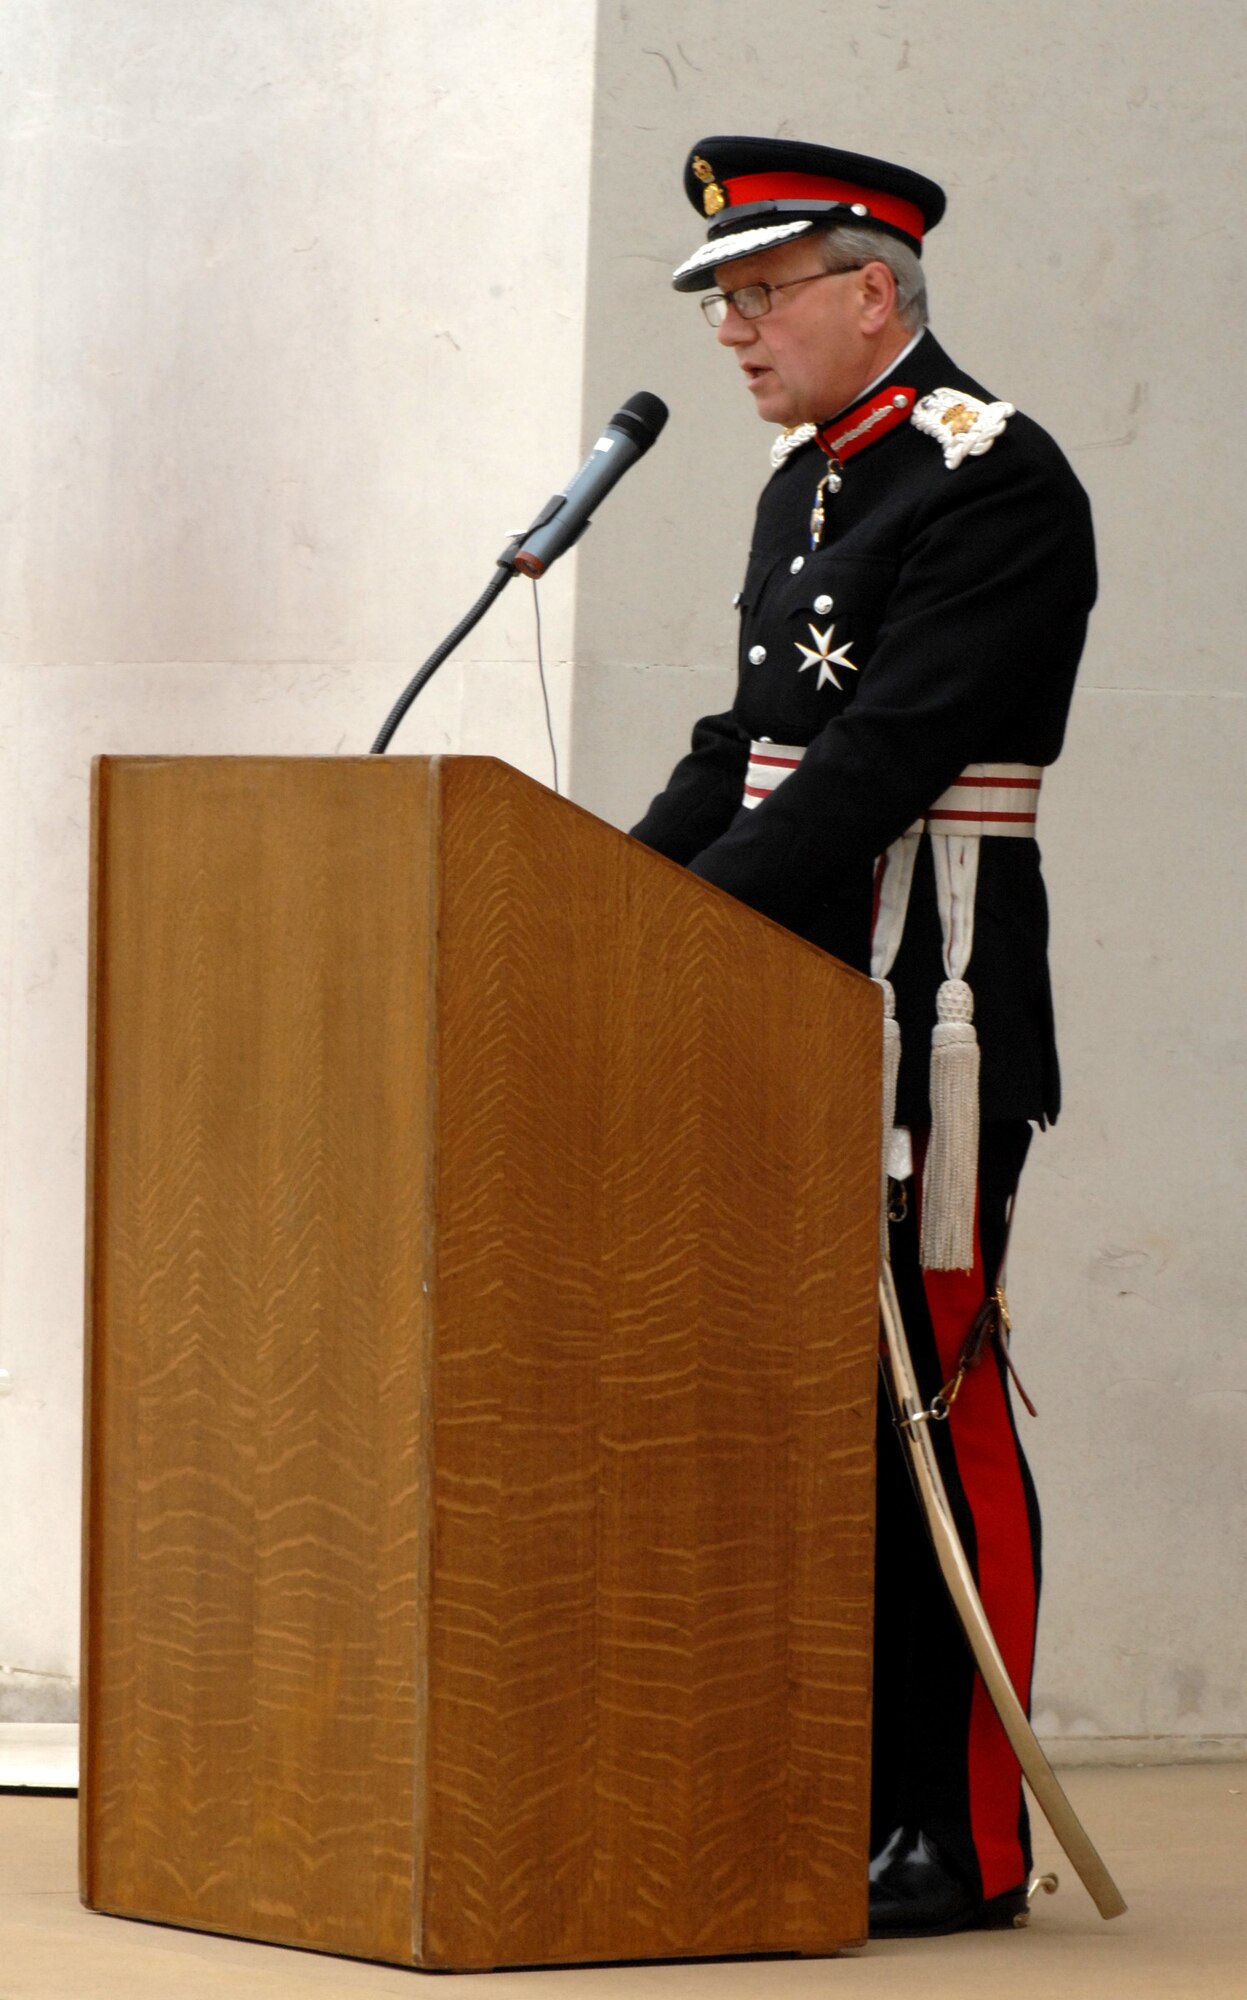 Hugh Duberly, Her Majesty's Lord-Lieutenant of Cambridgeshire, speaks to a somber audience during the Memorial Day ceremony at Madingley Memorial Cemetery, May 25, 2009.  The event included a wreath laying and a 21-gun salute.  (U.S. Air Force photo by Senior Airman Christopher L. Ingeroll)